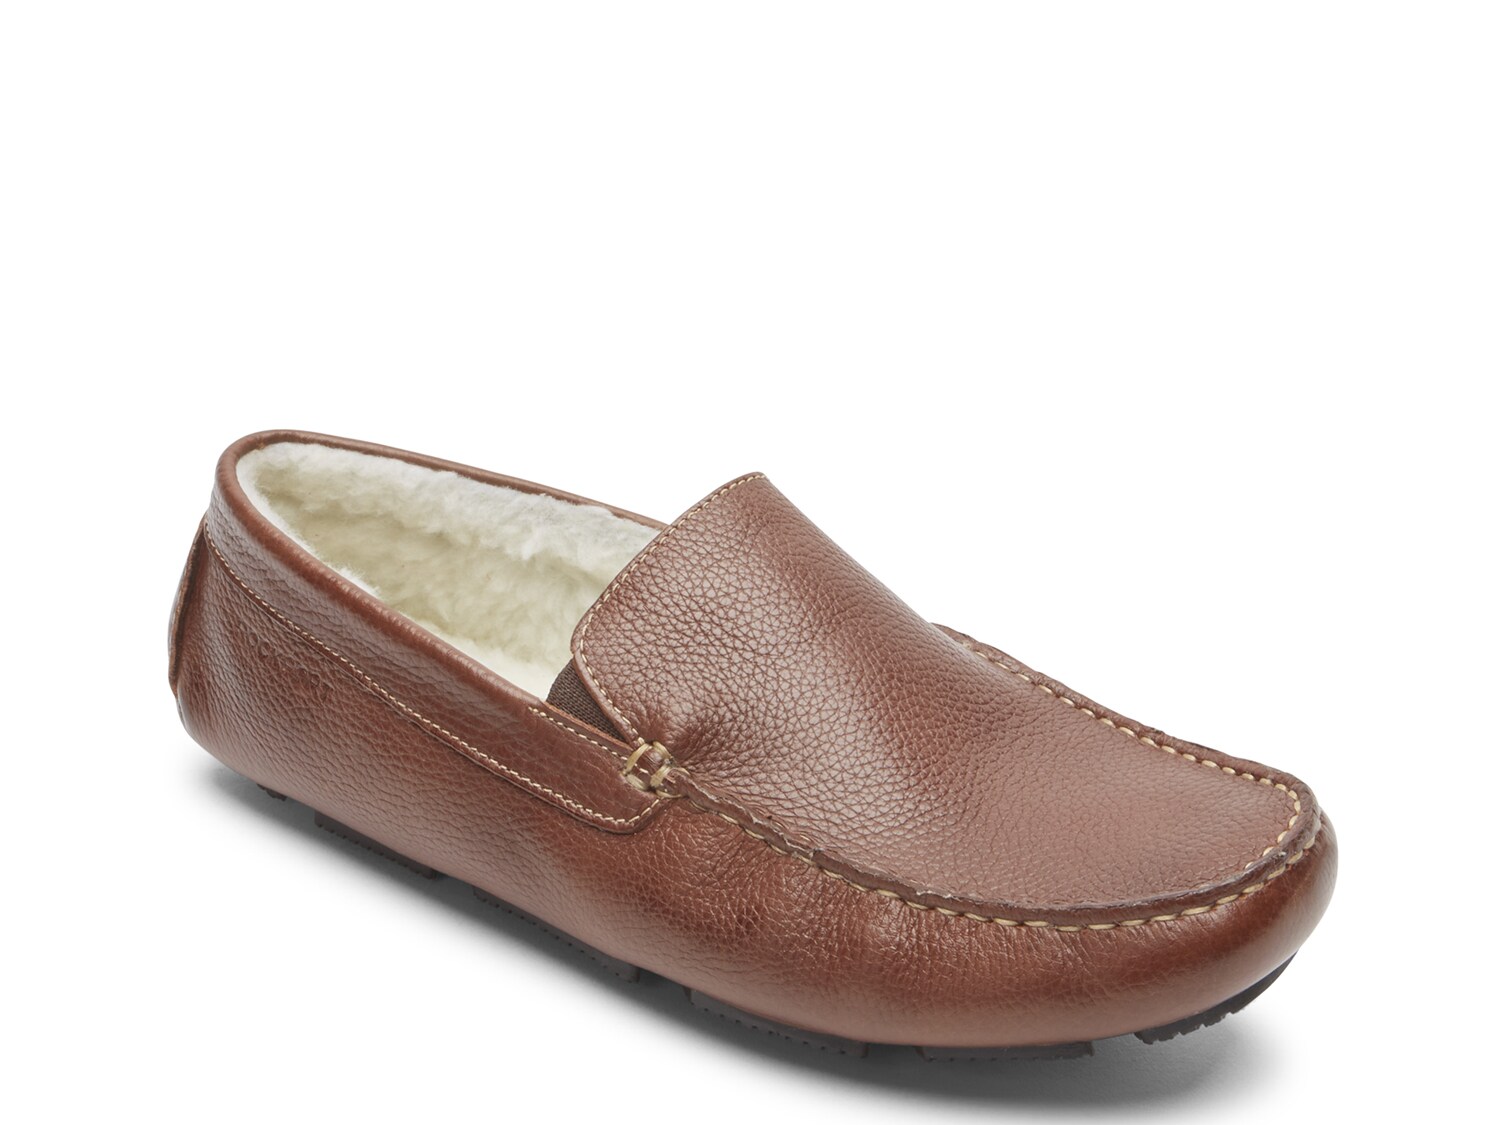 Loafers, Slip-Ons, and Moccasins | DSW